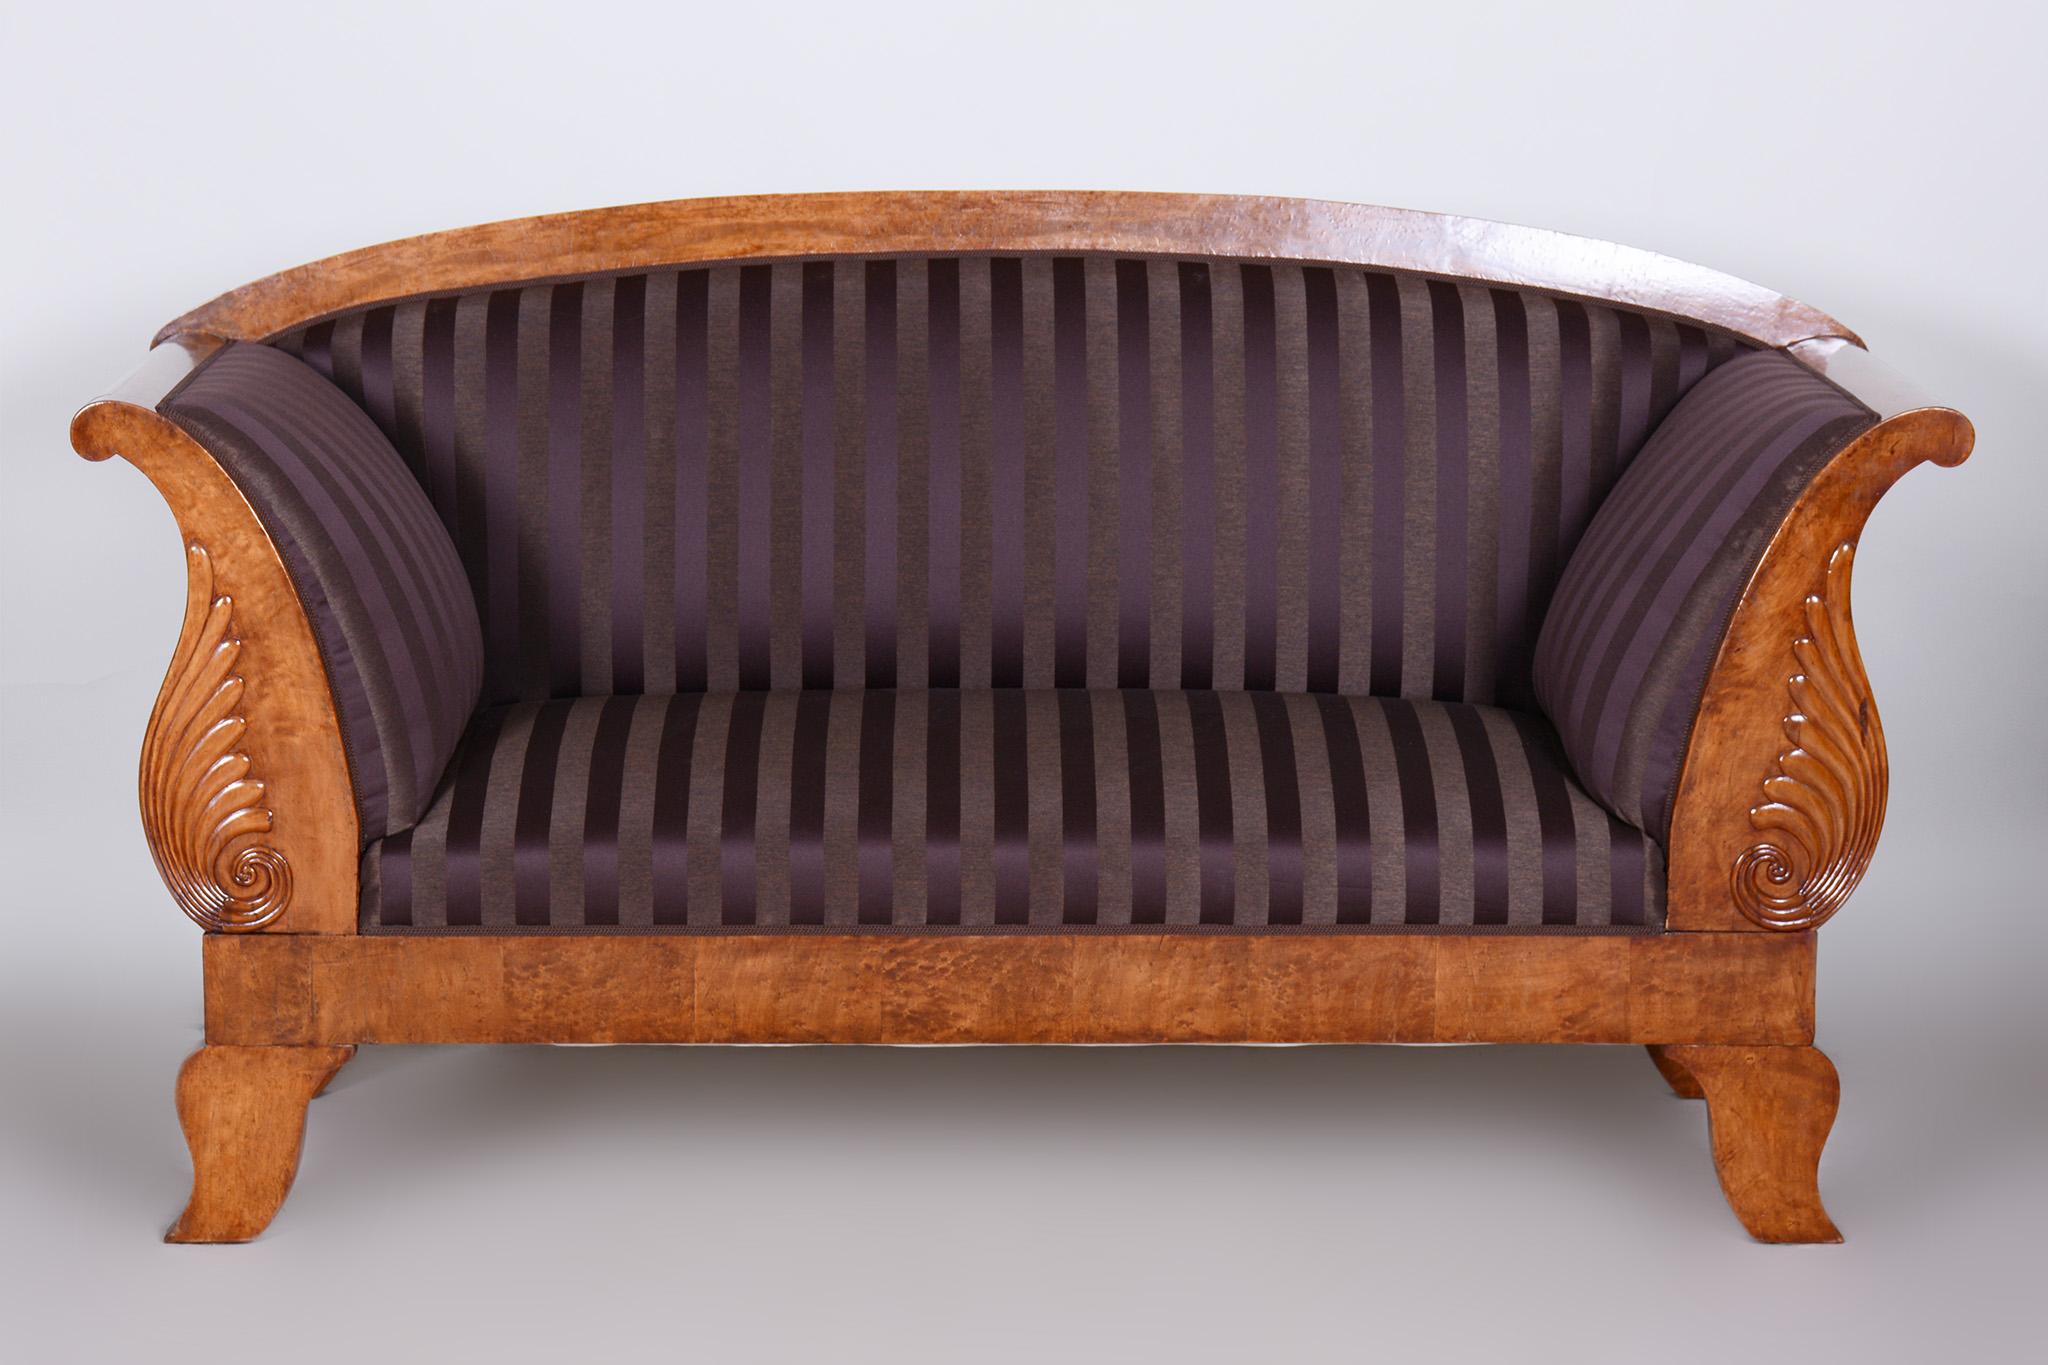 Restored Castle Biedermeier birch sofa with new upholstery and revived polish.

Source: Austria
Period: 1820-1829
Material: Birch, Fabric

It has been fully restored by our professional refurbishing team in Czechia according to the original